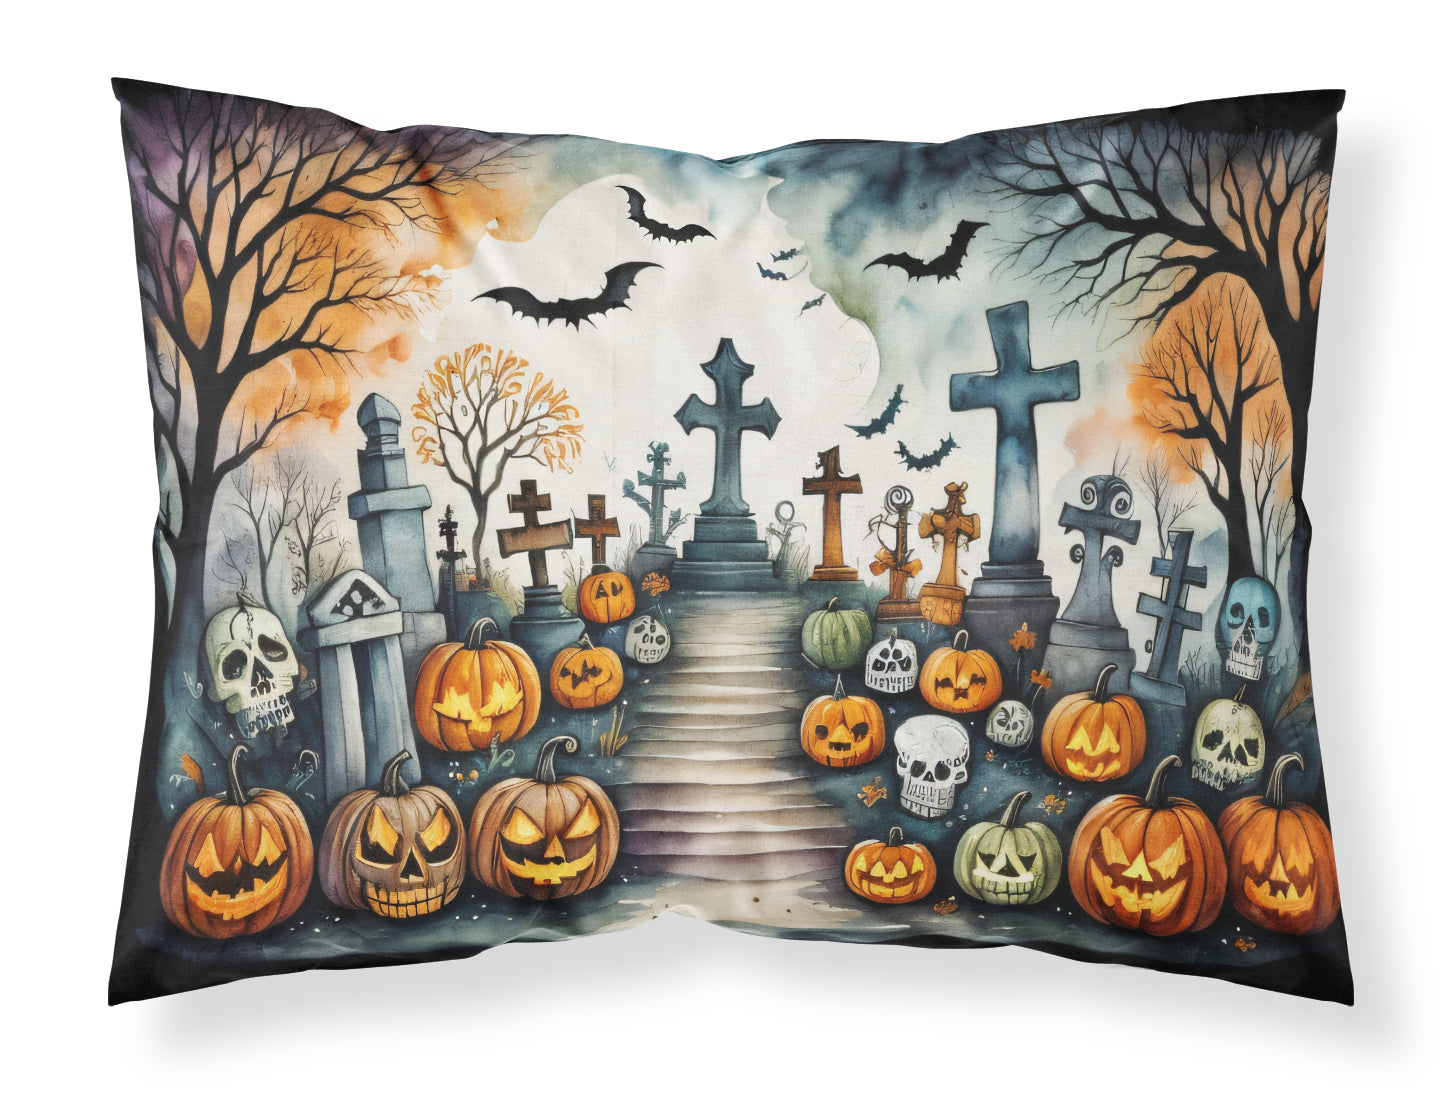 Buy this Day of the Dead Spooky Halloween Fabric Standard Pillowcase